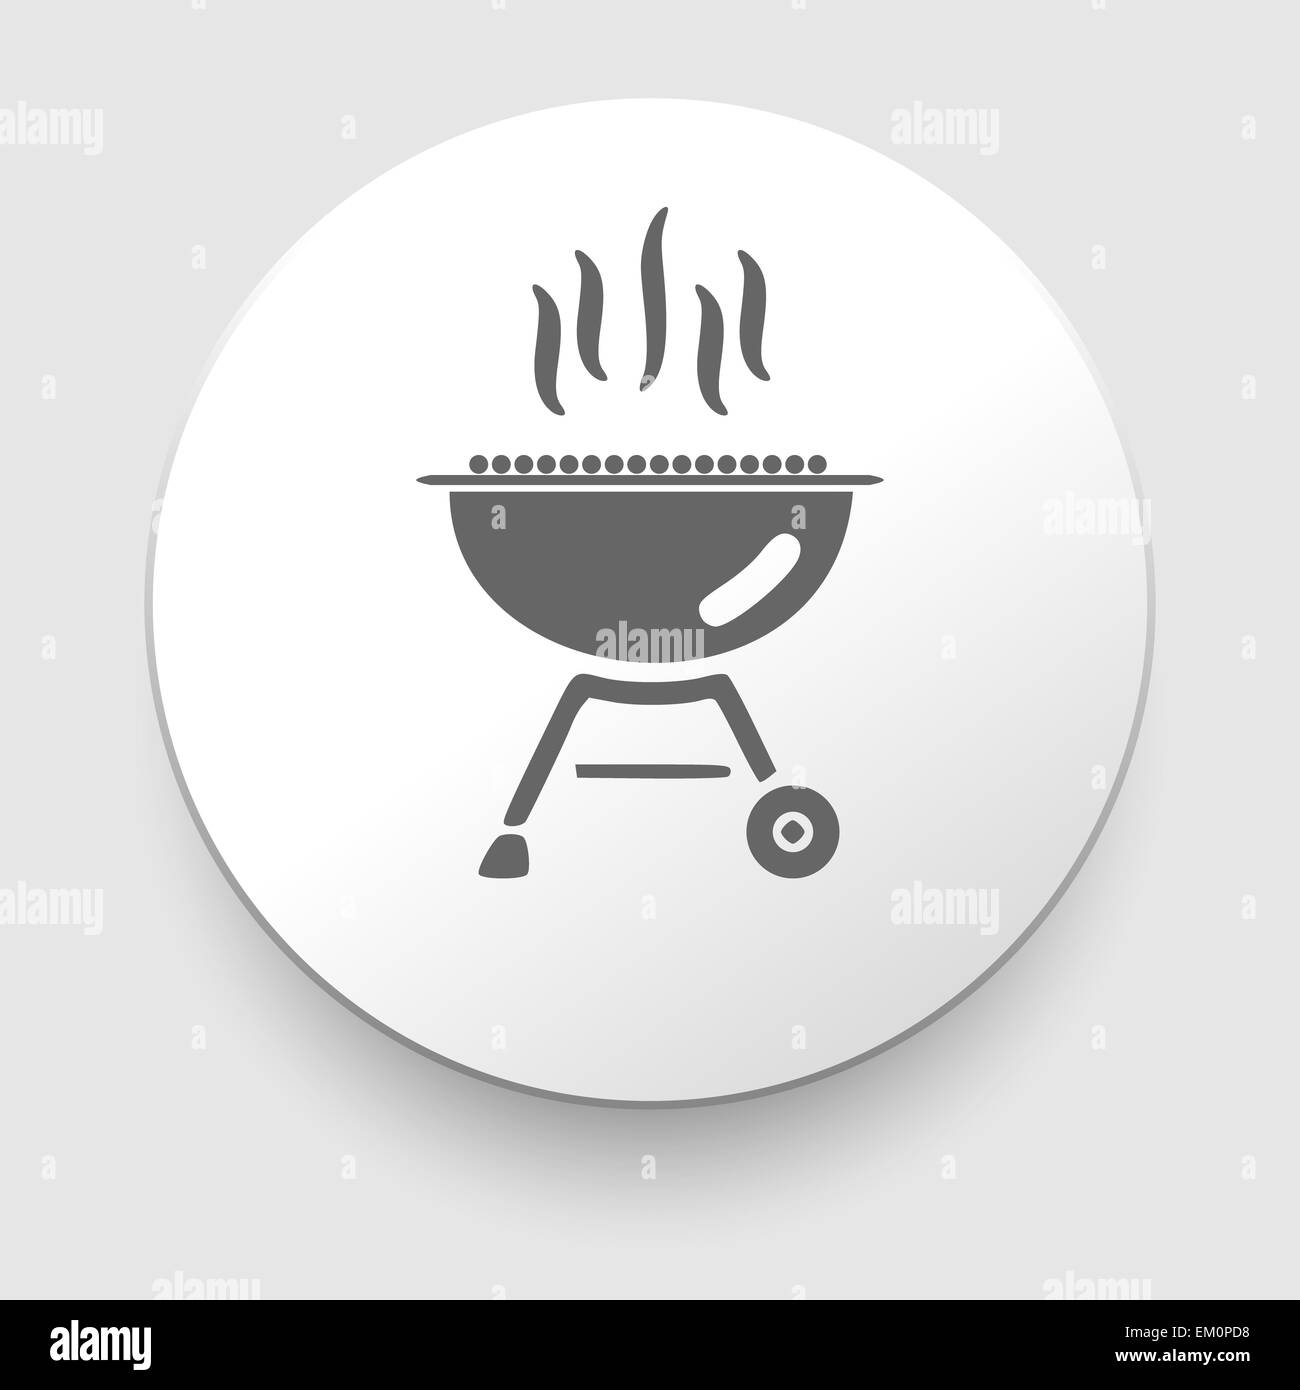 Grill and barbeque related vector icon Stock Photo